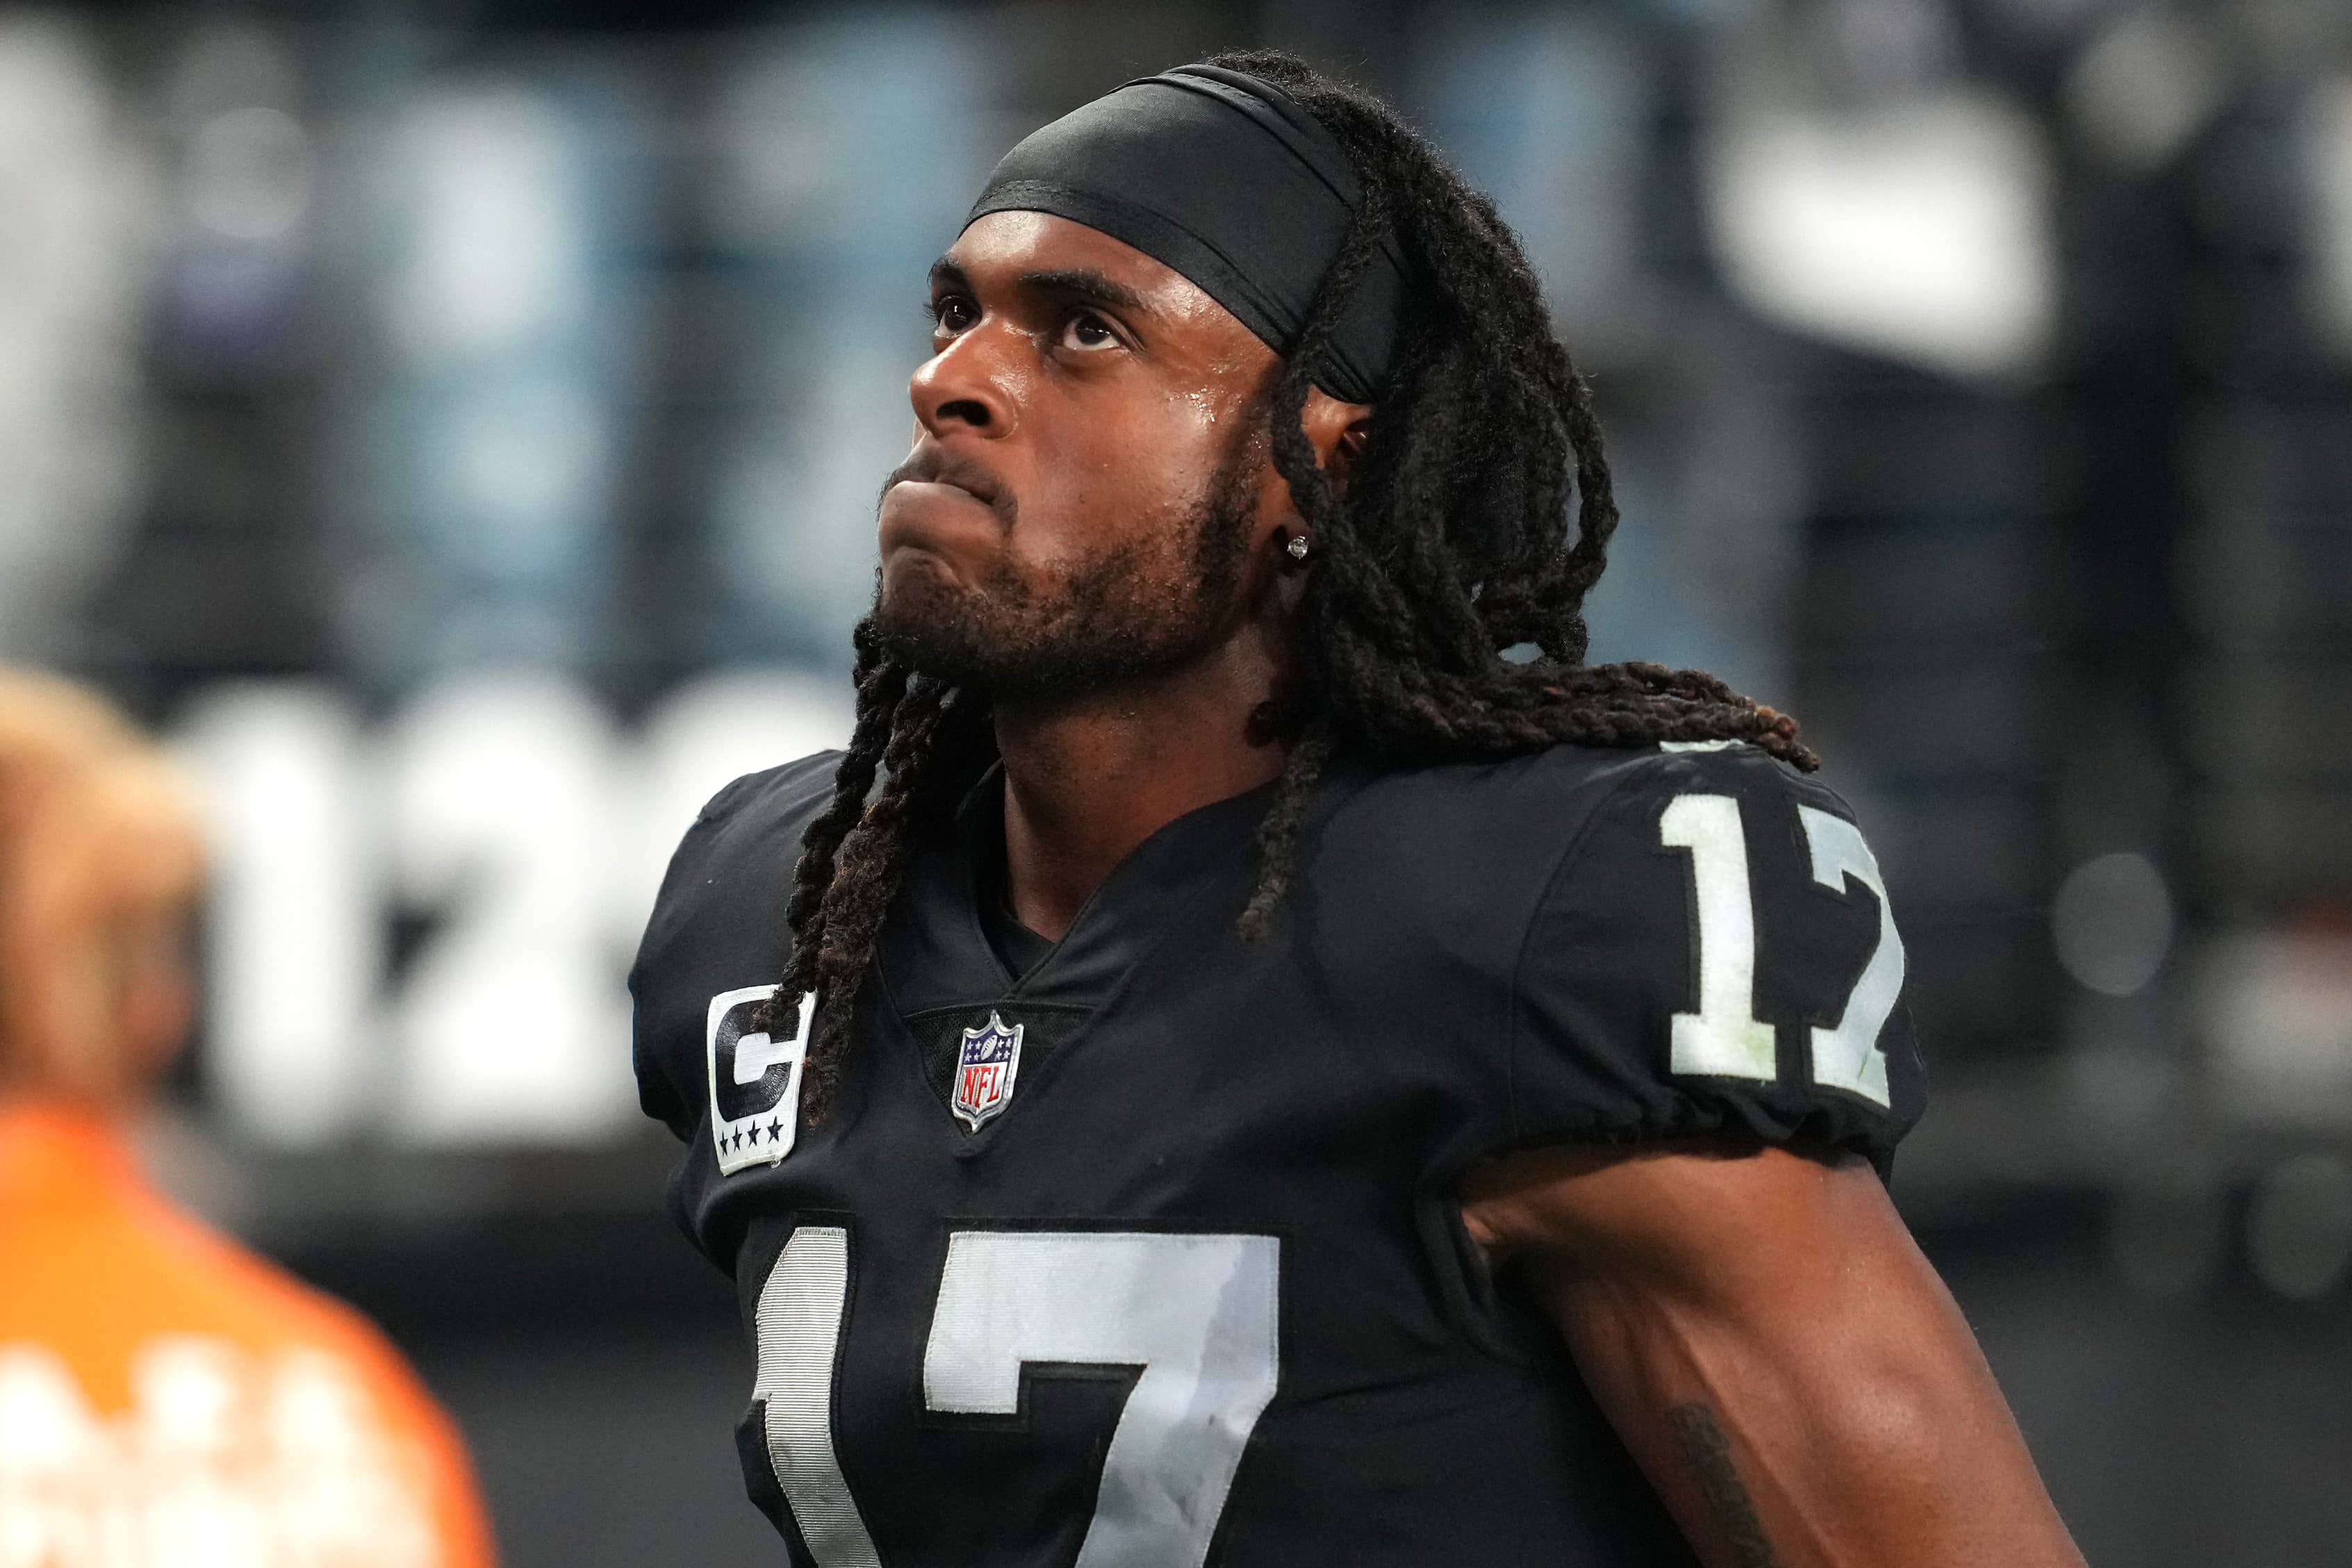 Raiders Receiver Not Happy After Illegal Hit on Sunday